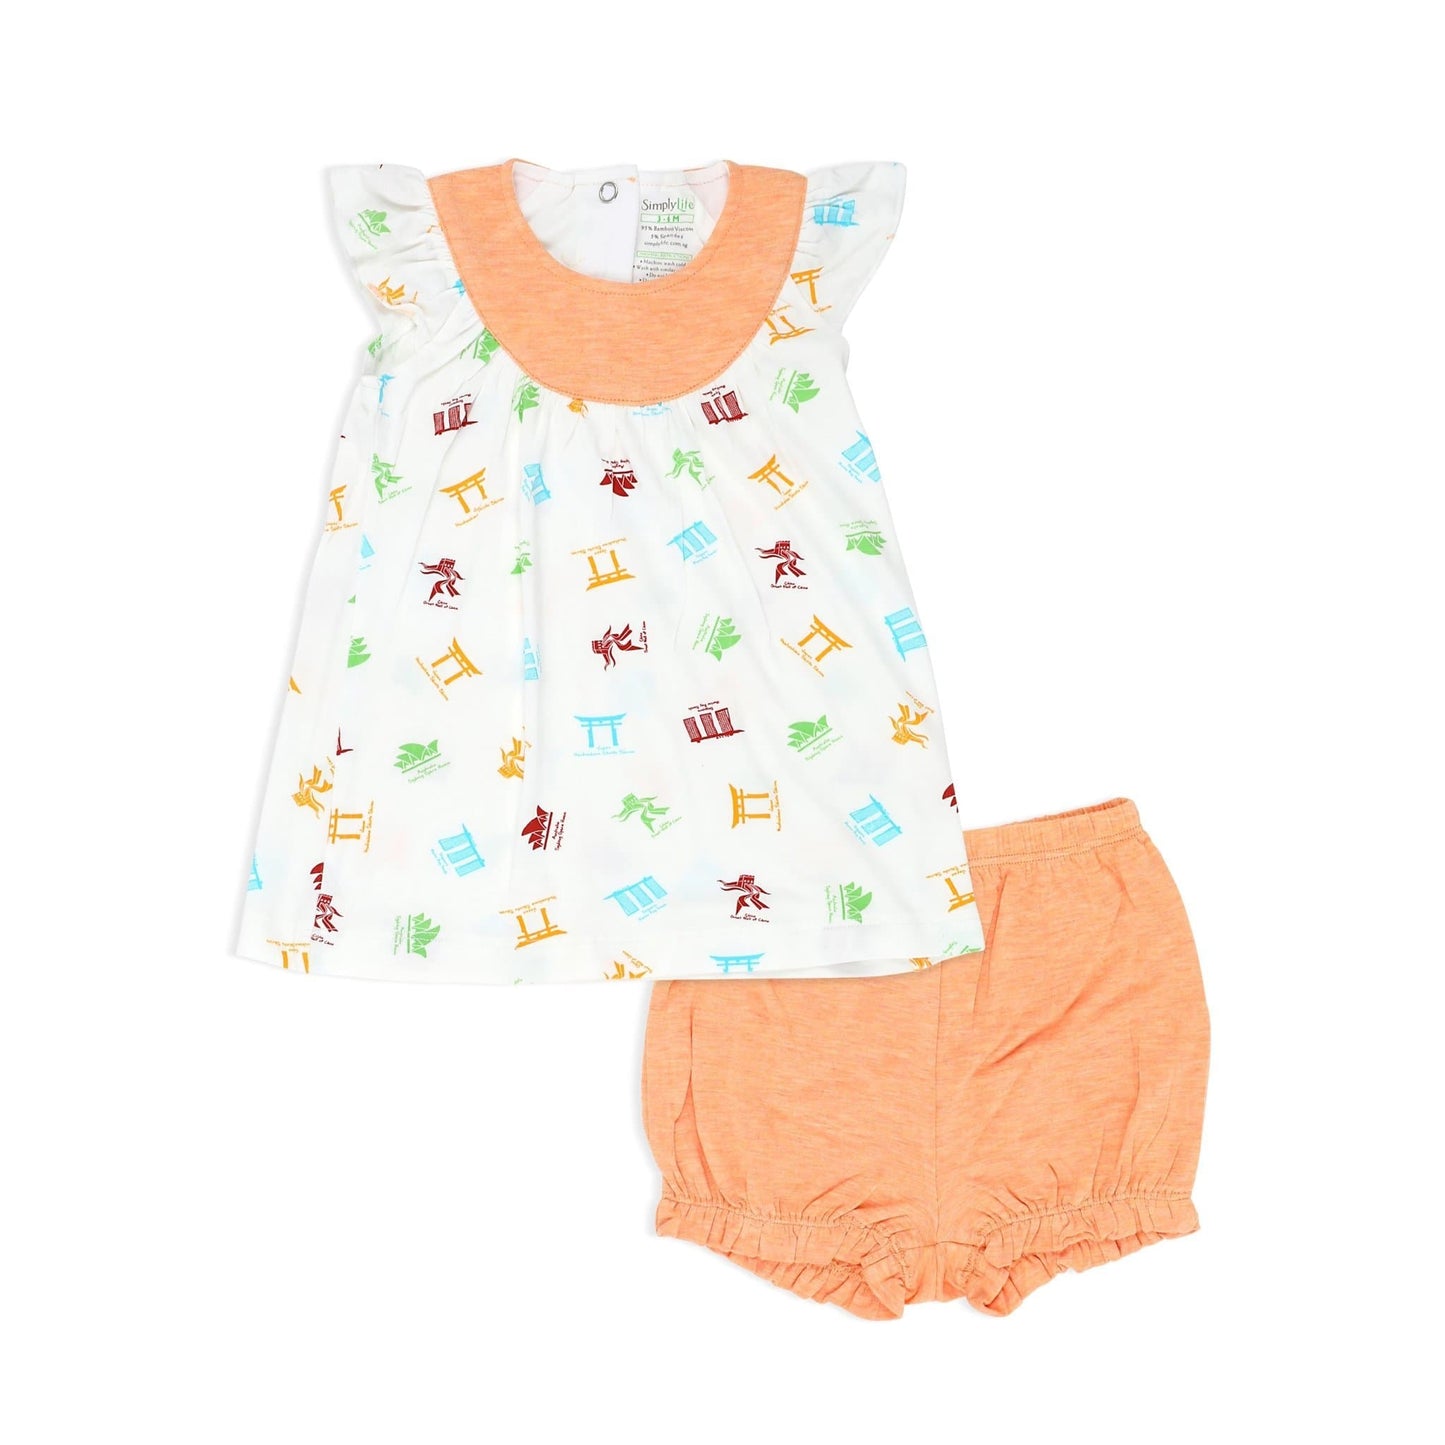 Travel - Blouse with cap-sleeves & bloomer shorts (2pc Set) - Simply Life